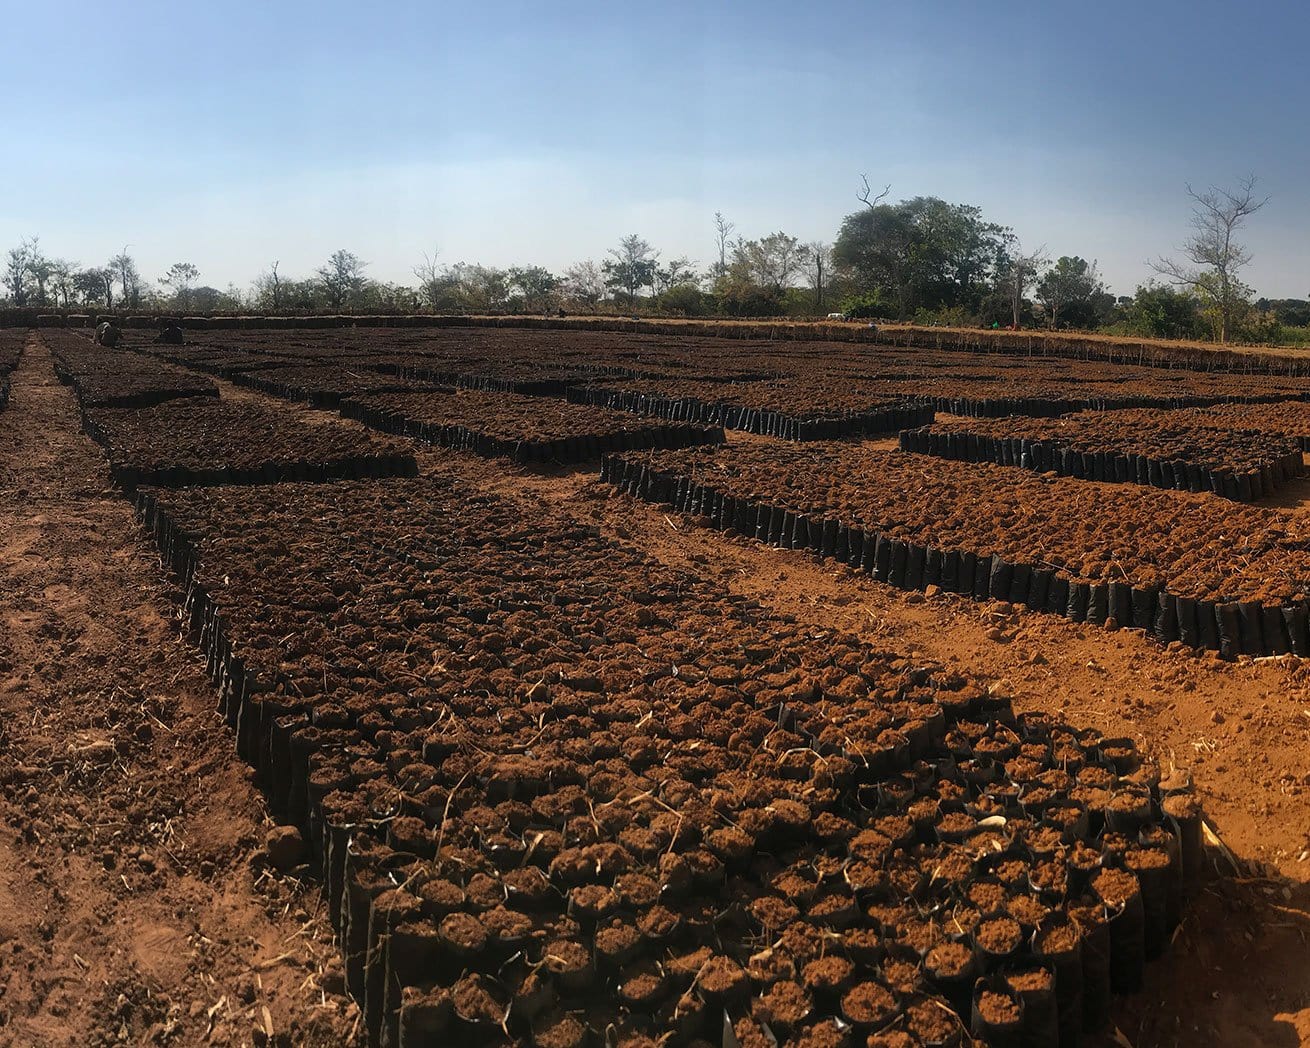 Tree planting site in Africa